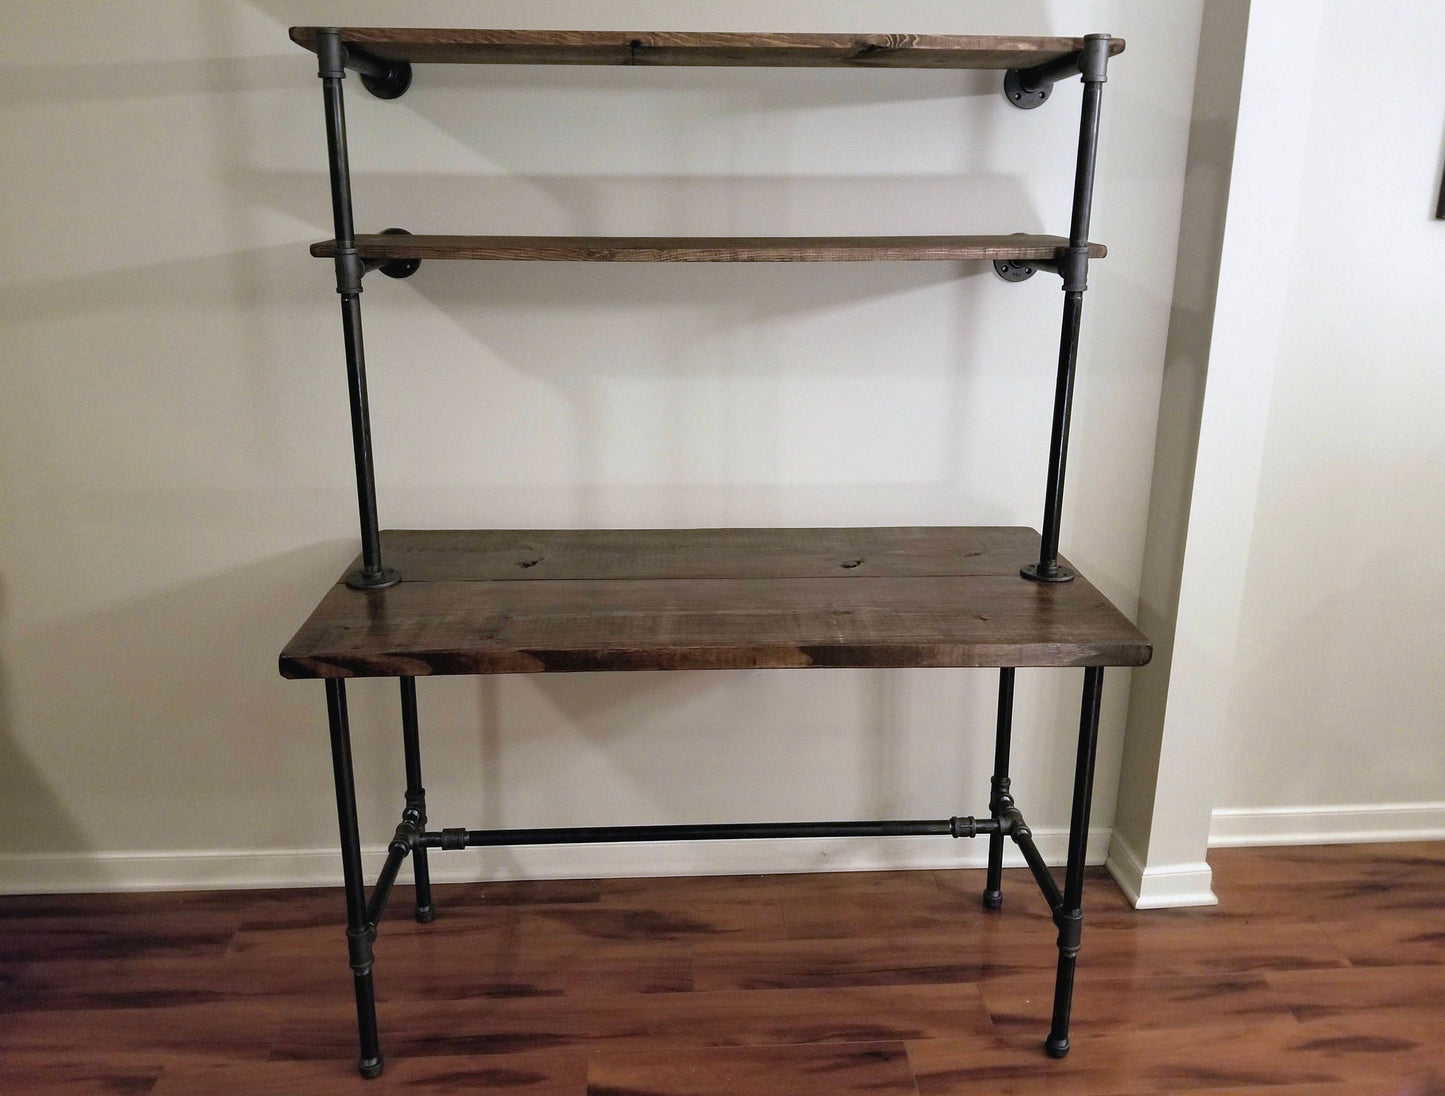 Steel and Wood Desk - Office Iron Pipe Desk with 2 Wall Shelves - Multiple Shelf - Free Shipping